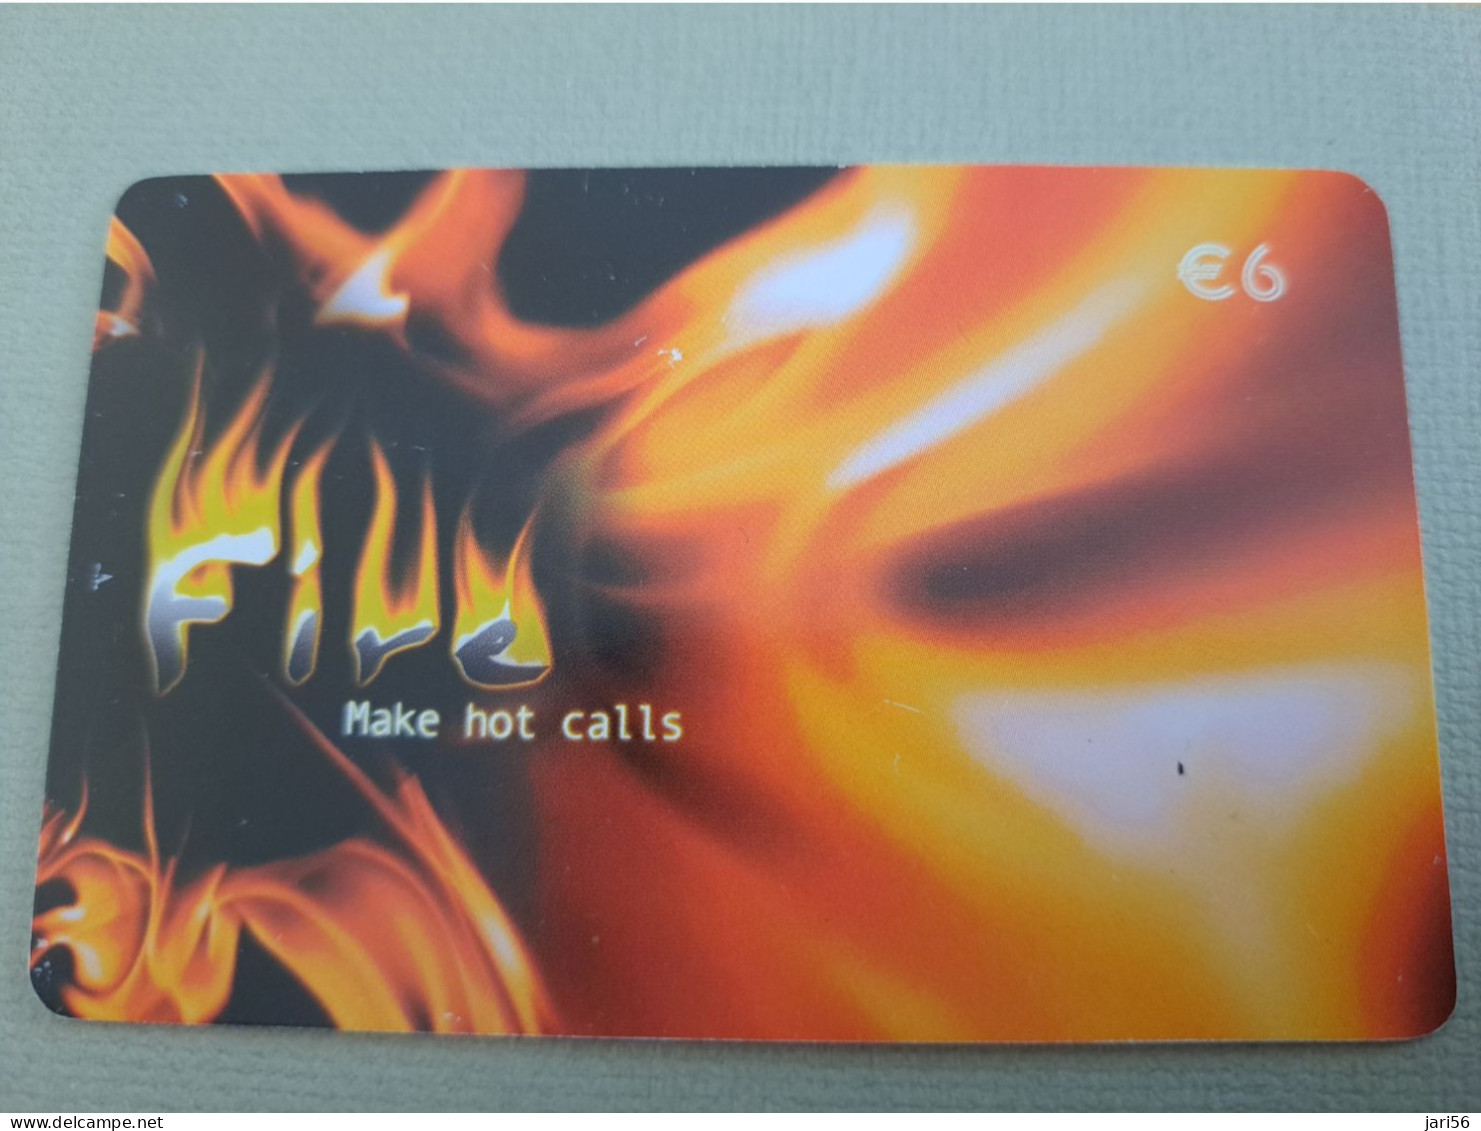 NETHERLANDS /  PREPAID / FIRE/ MAKE HOT CALLS  /  € 6,-  USED  ** 15254** - Privadas